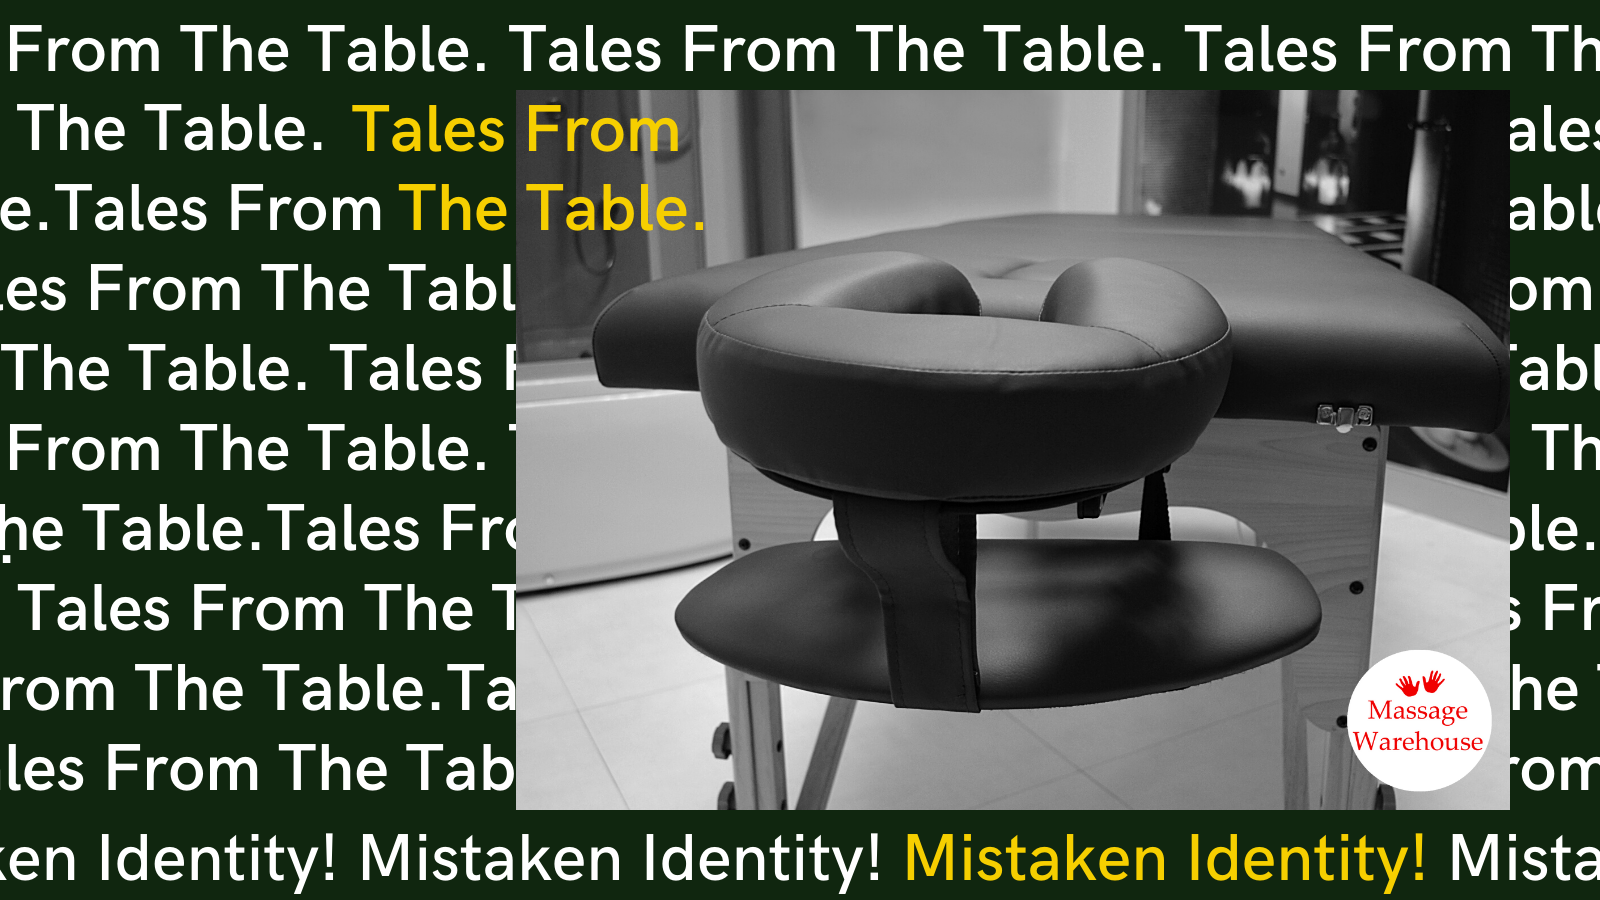 Tales from the Table - Mistaken Identity!